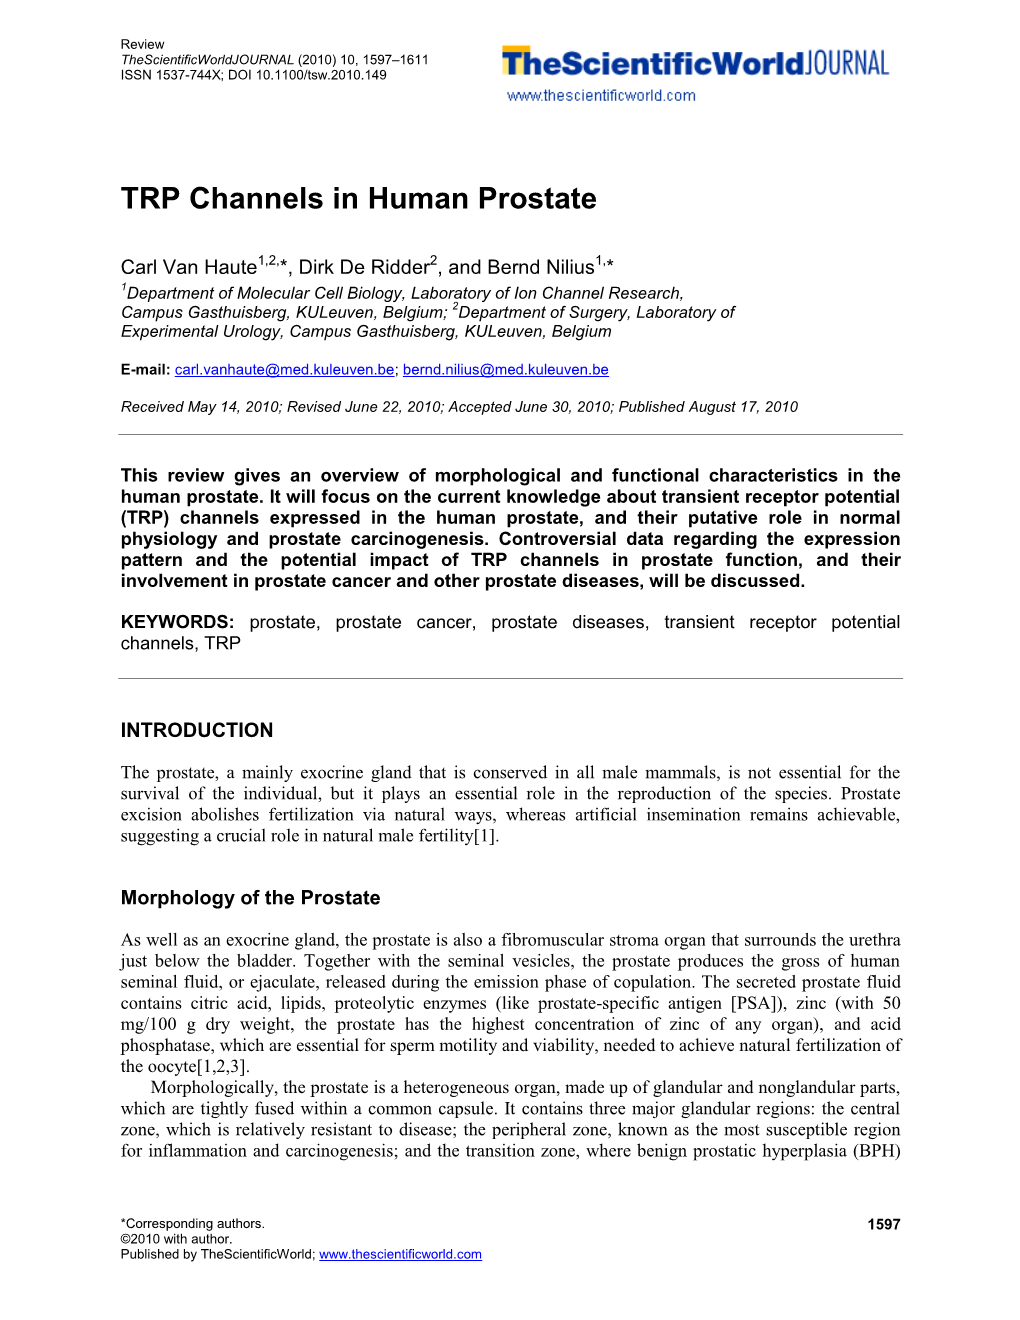 TRP Channels in Human Prostate